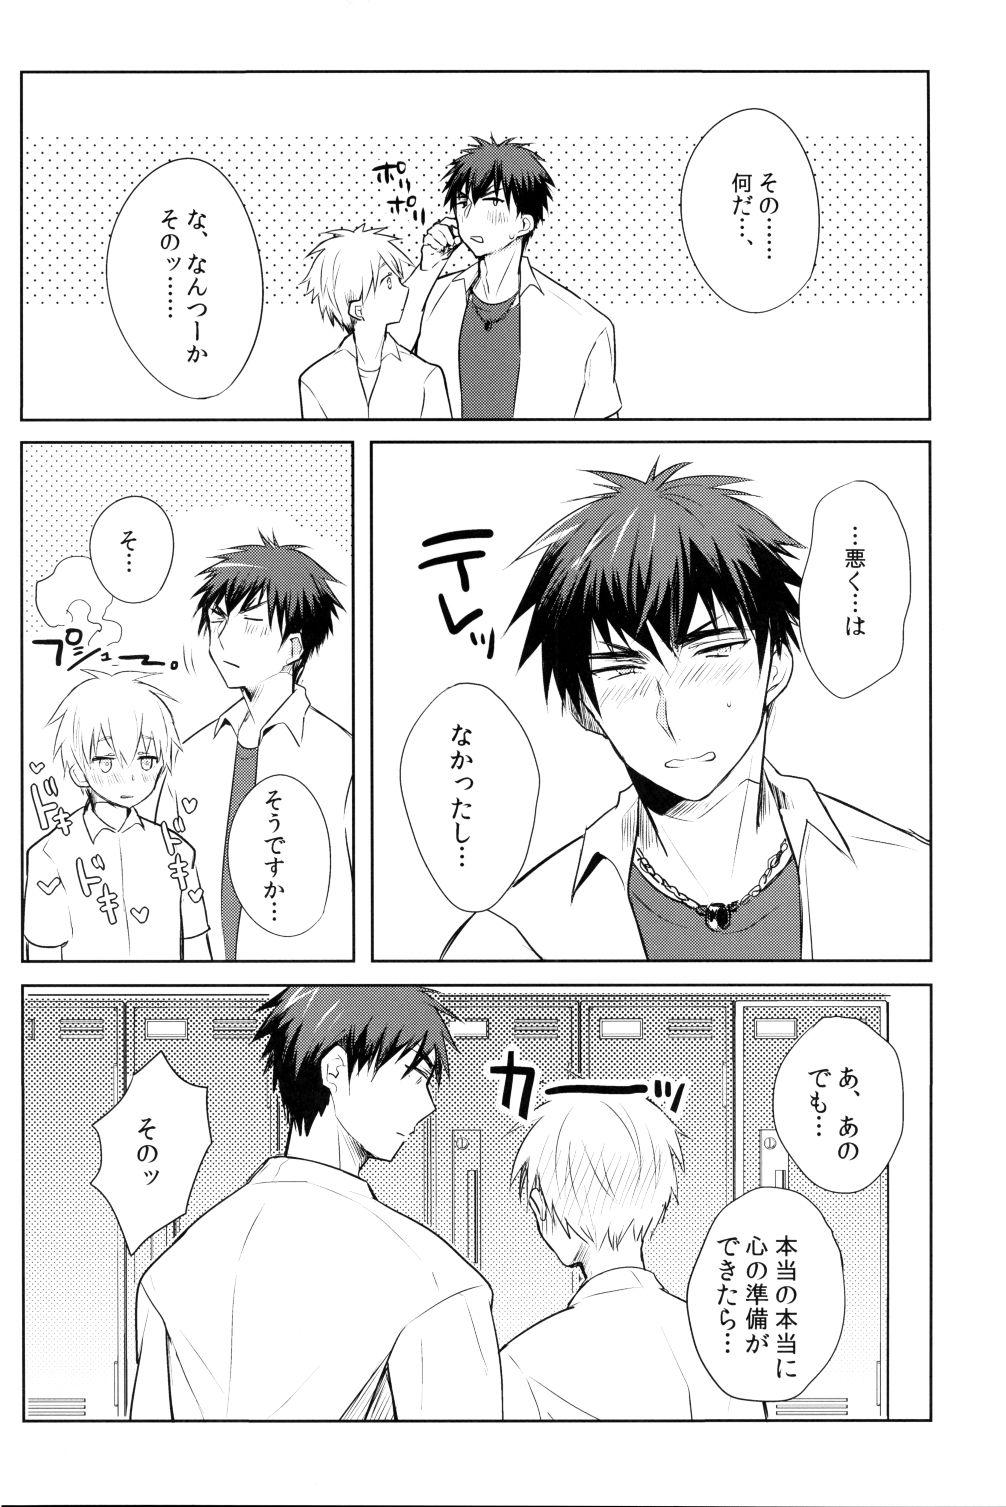 Kagami-kun's Thing is Amazing!! 26